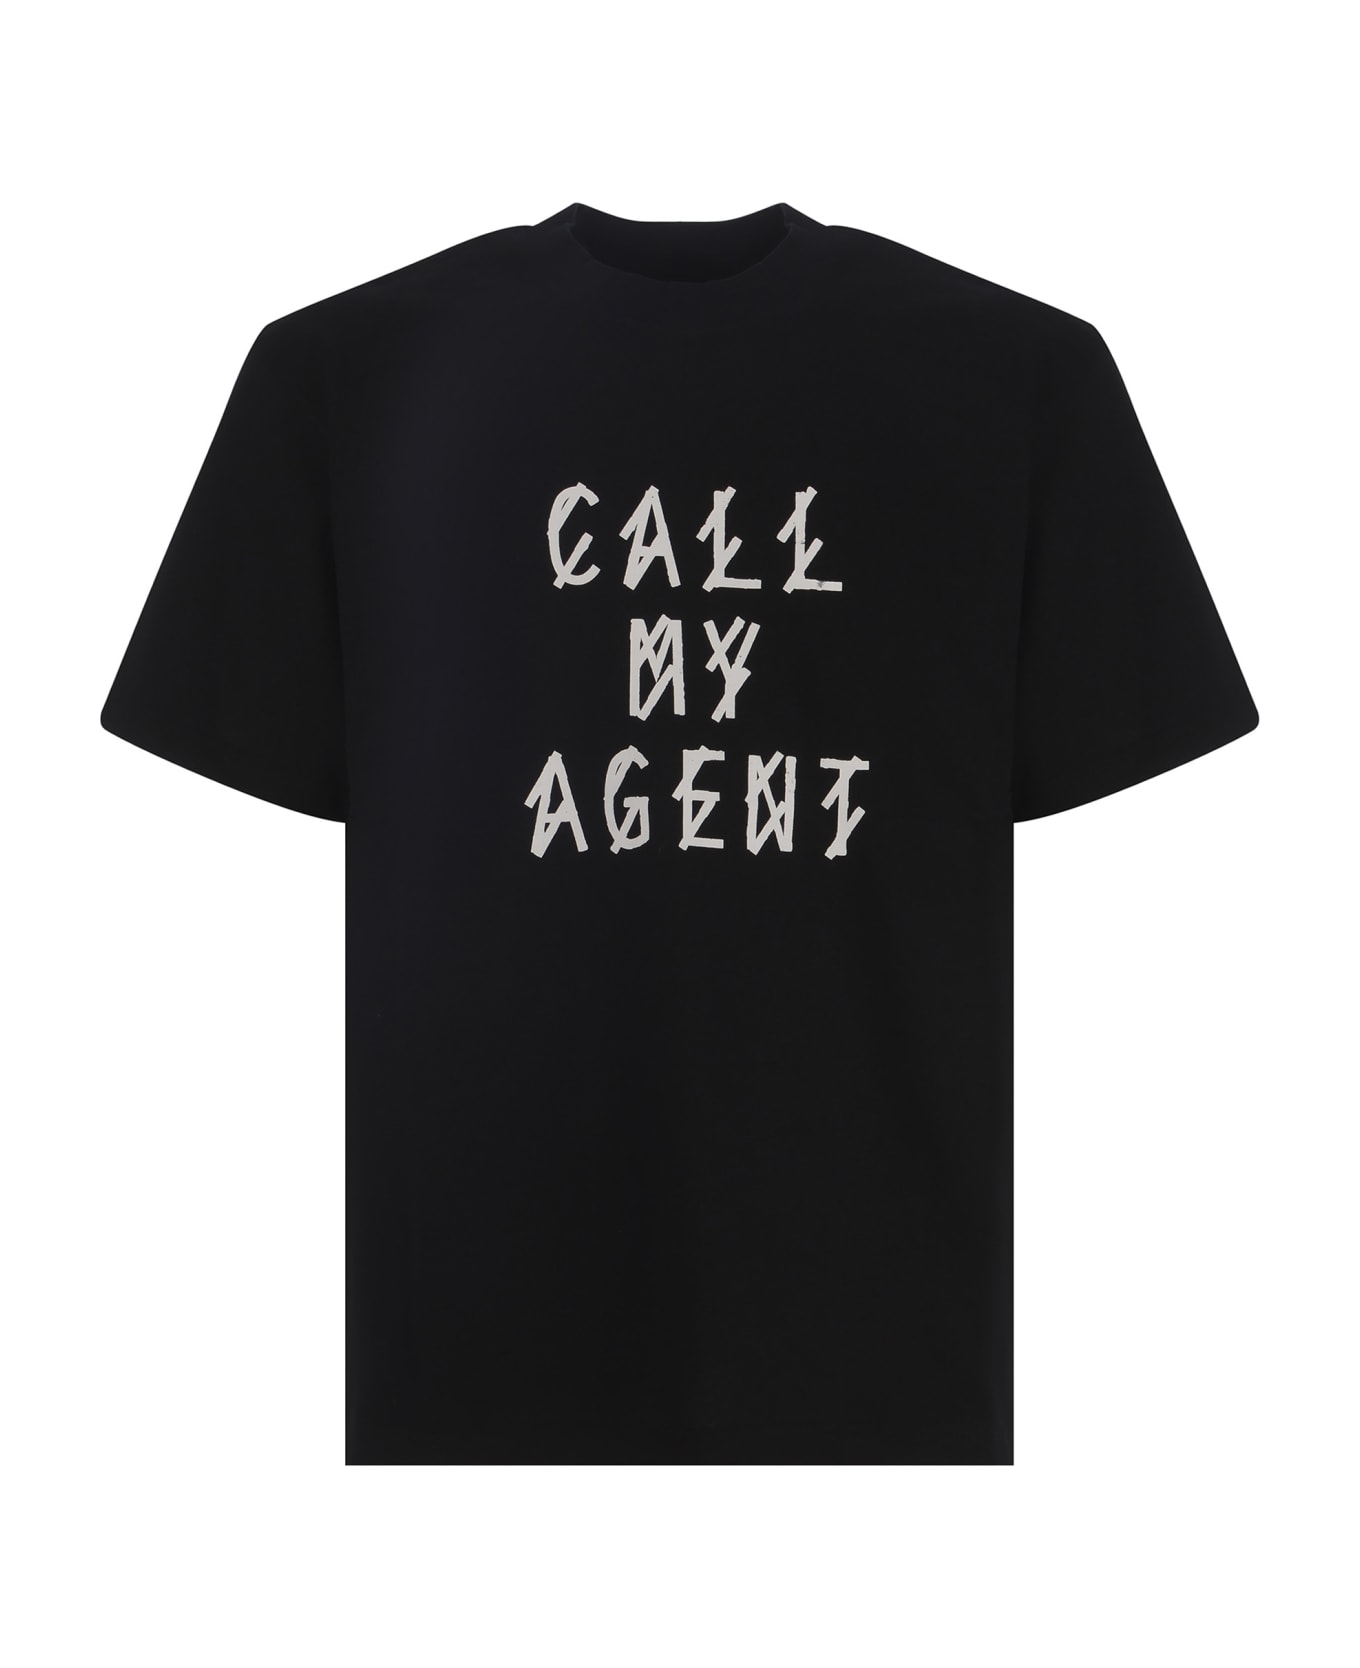 44 Label Group T-shirt 44 Label Group "agente" Made Of Cotton - Nero